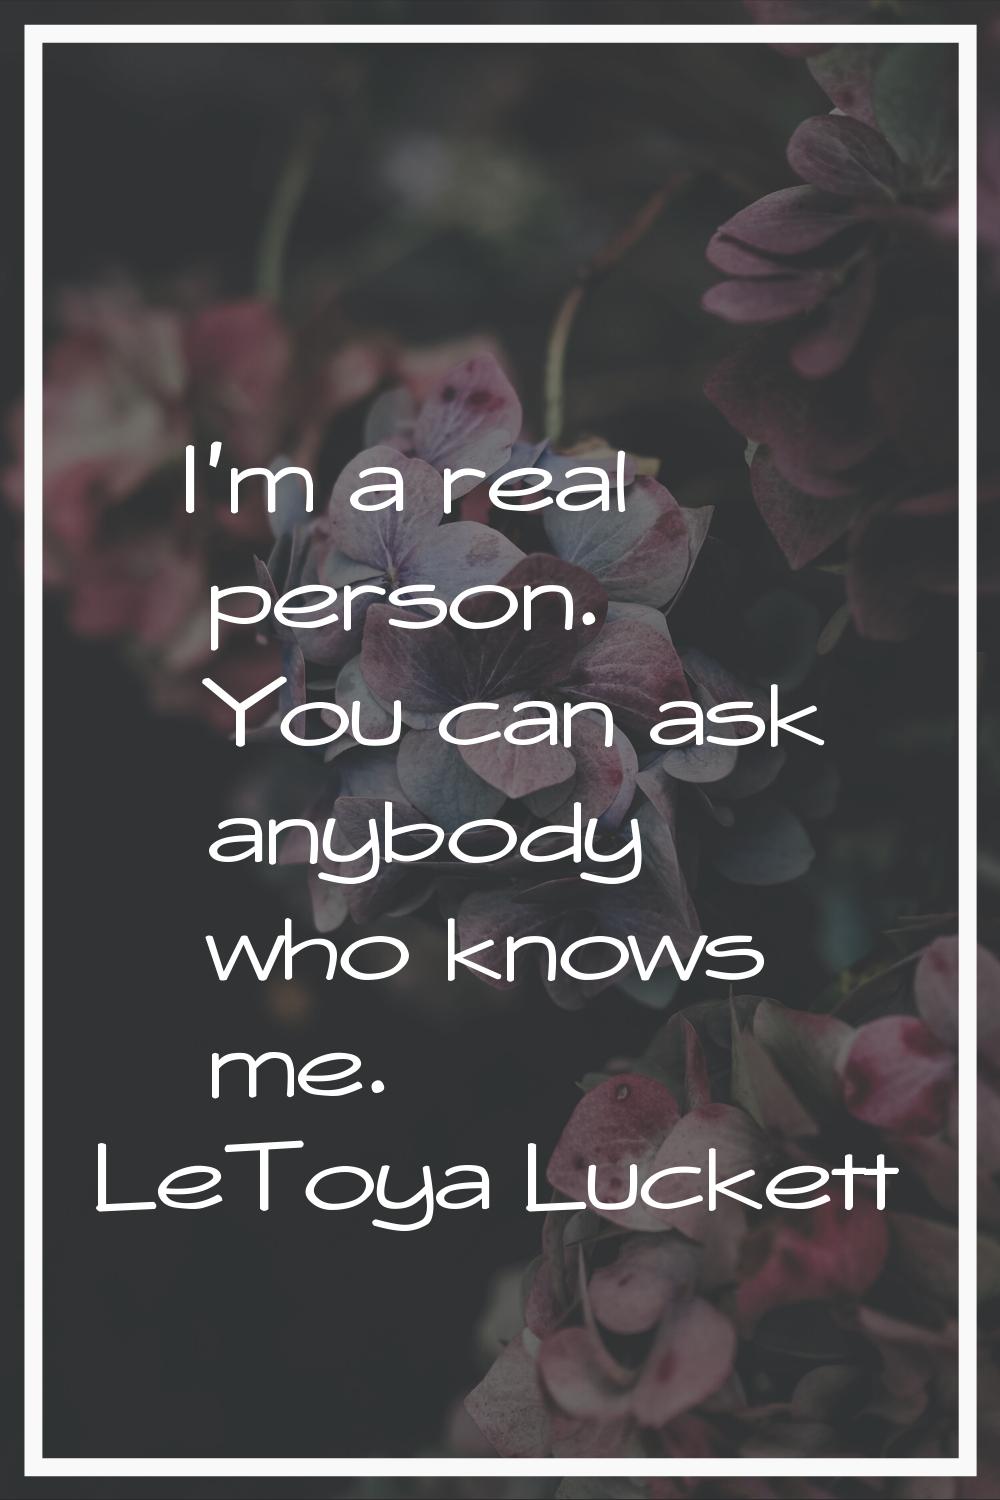 I'm a real person. You can ask anybody who knows me.